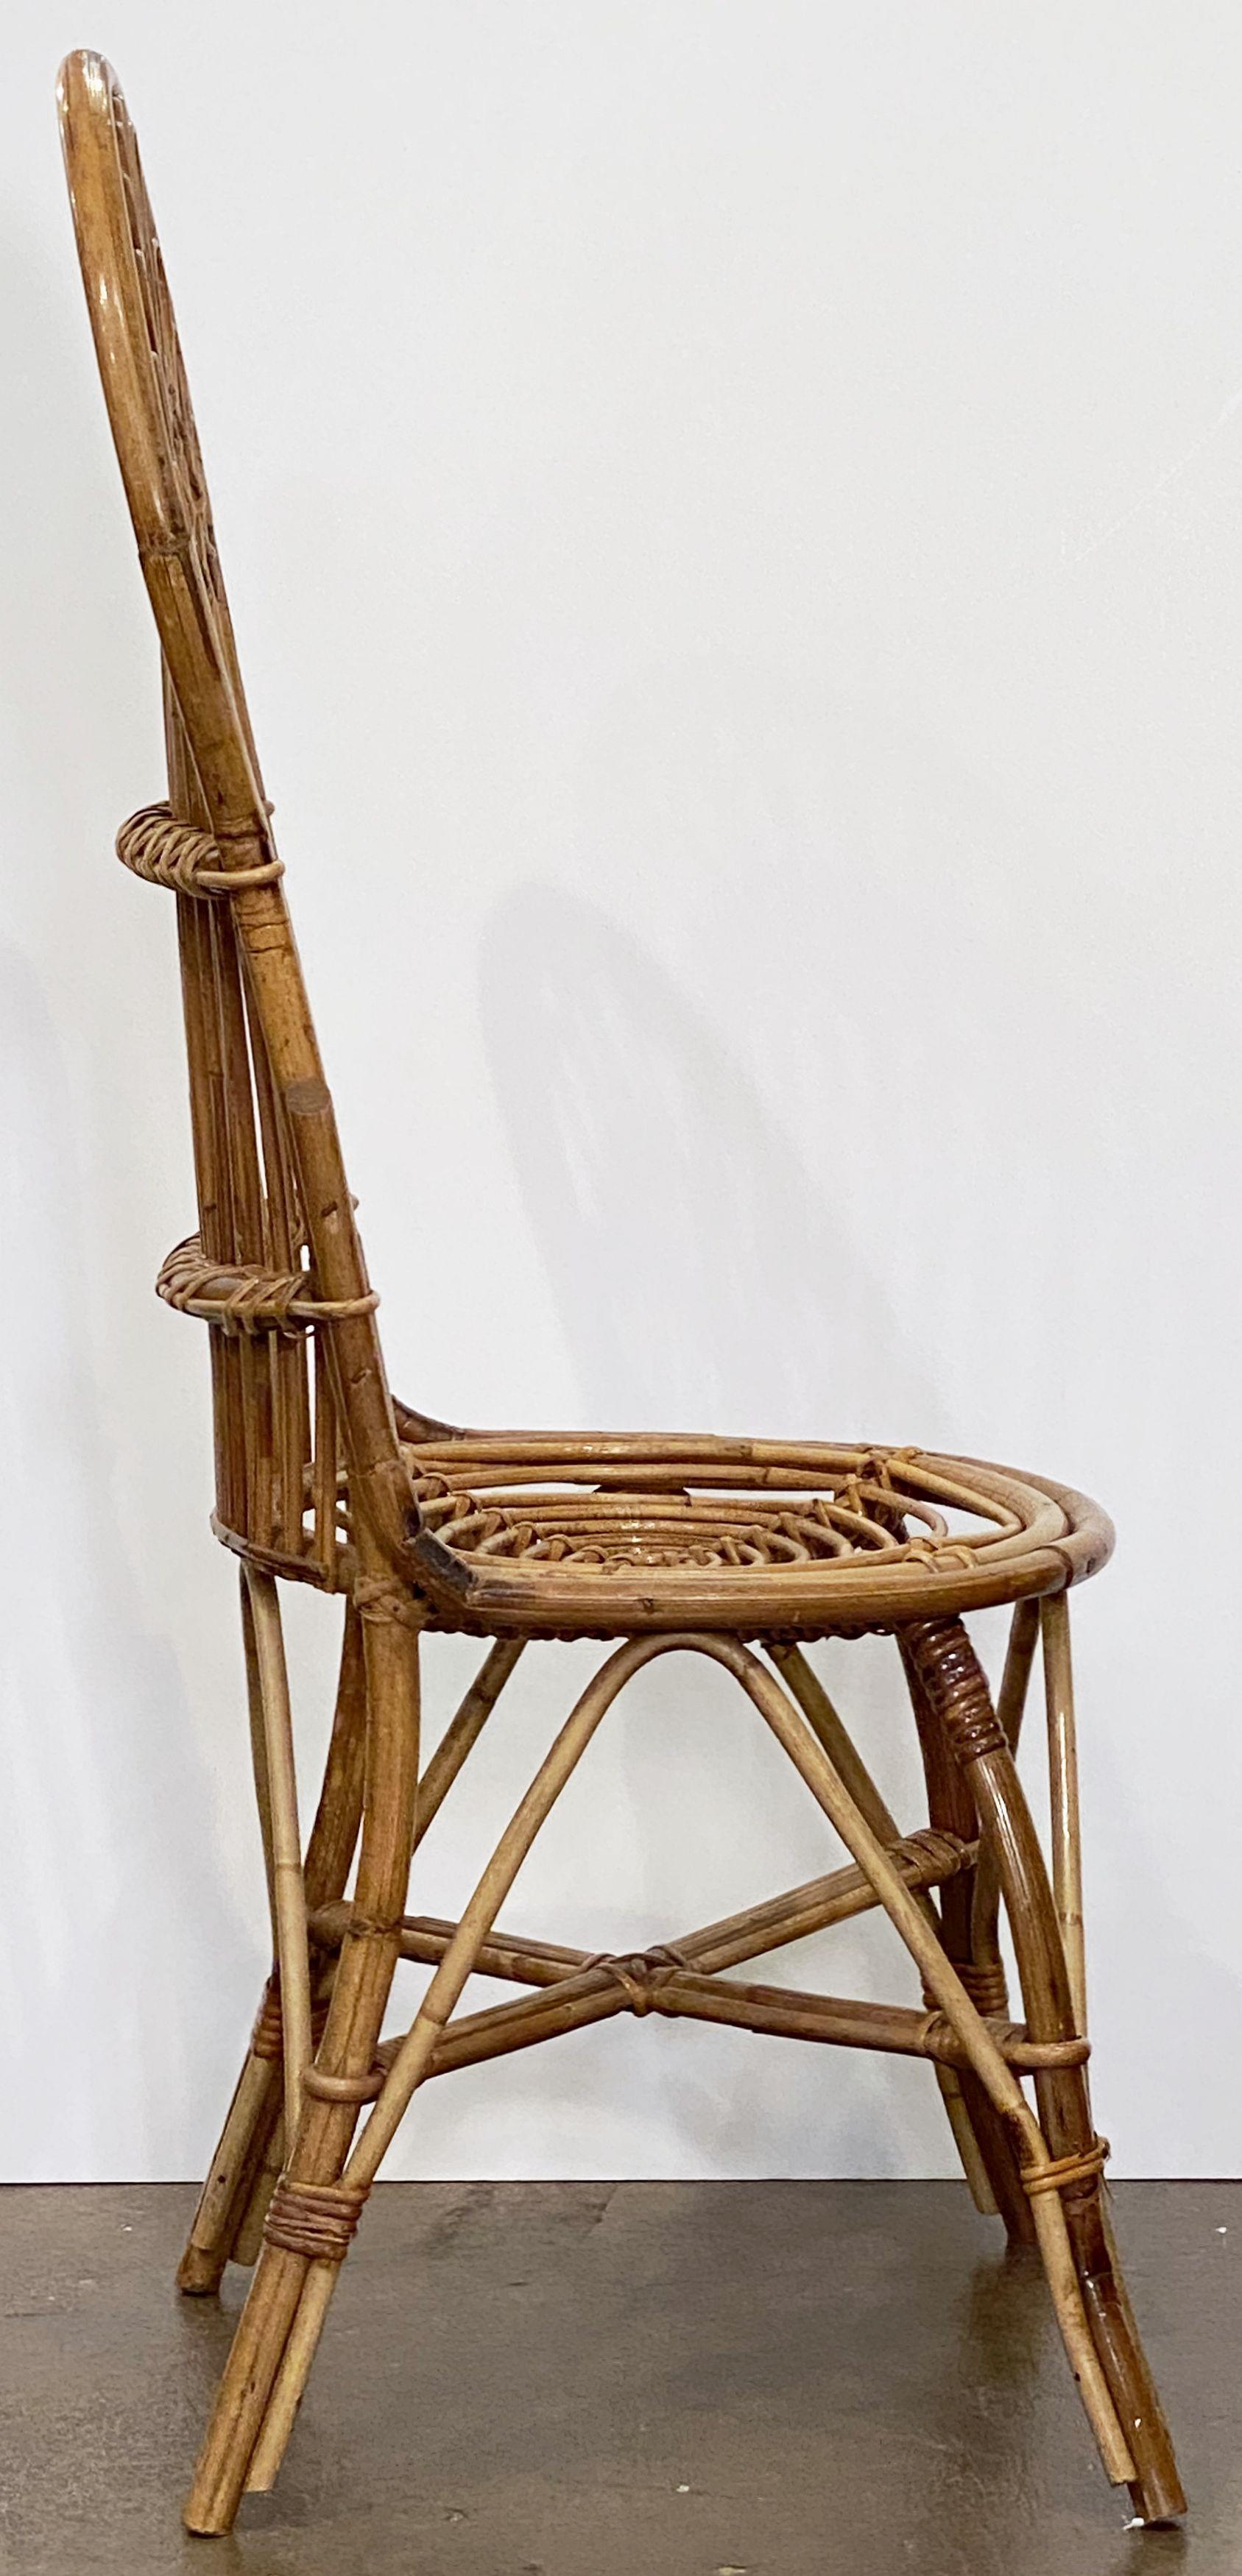 Italian Fan-Backed Chair of Rattan and Bamboo from the Mid-20th Century For Sale 7